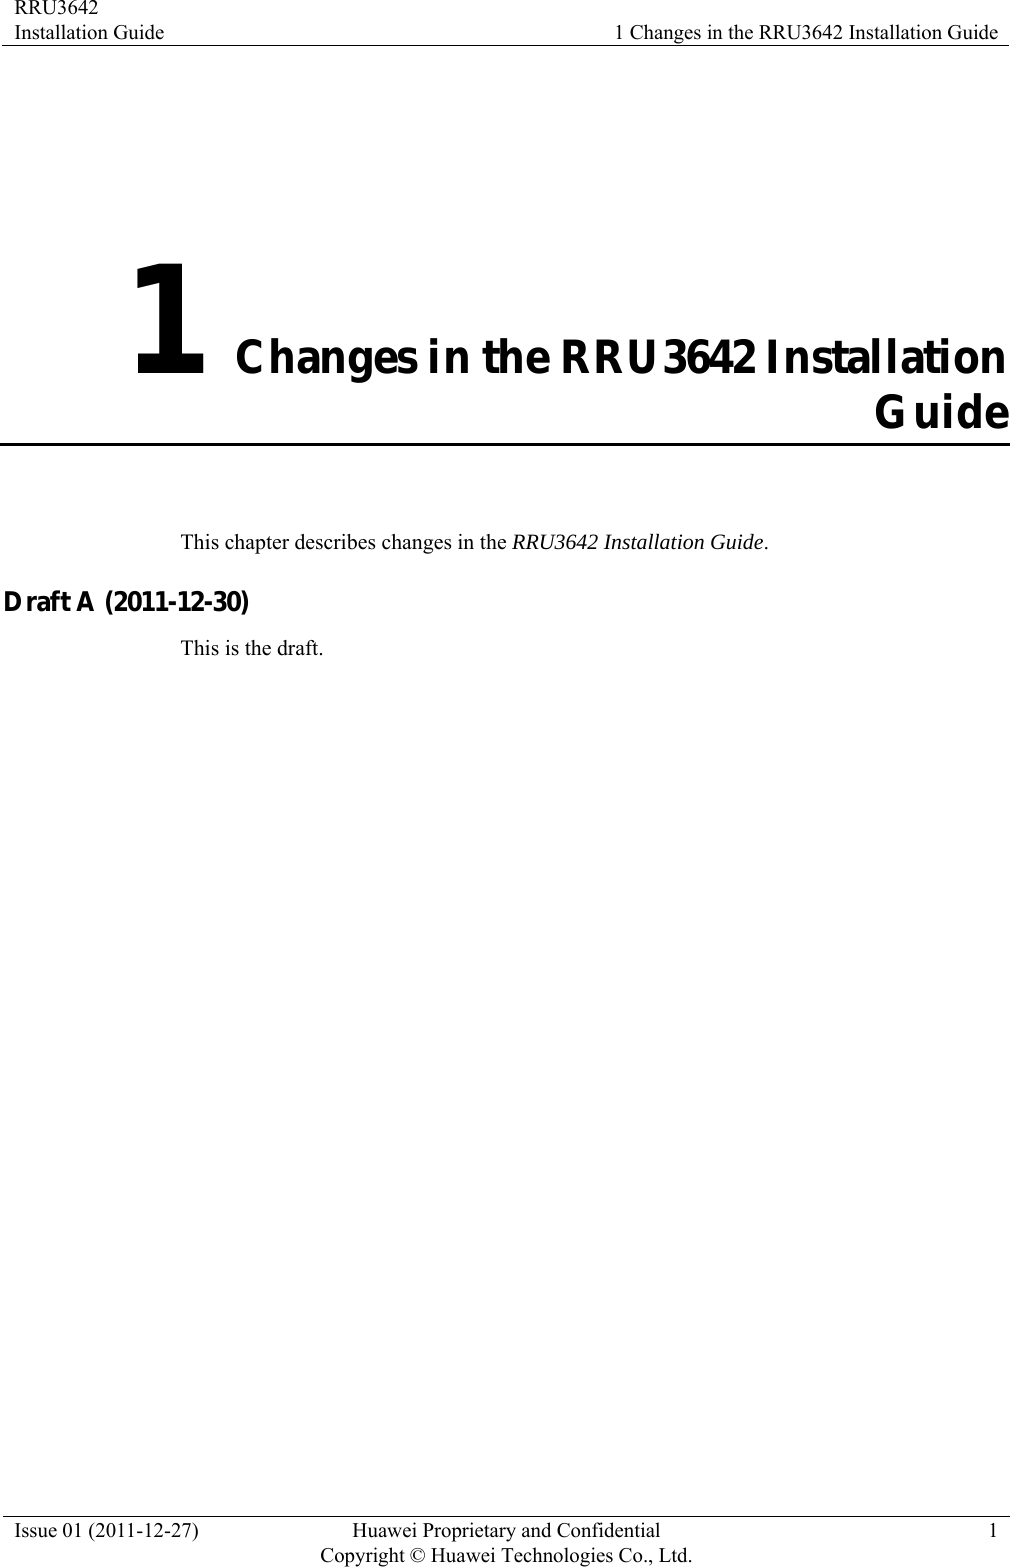 RRU3642 Installation Guide  1 Changes in the RRU3642 Installation Guide Issue 01 (2011-12-27)  Huawei Proprietary and Confidential         Copyright © Huawei Technologies Co., Ltd.1 1 Changes in the RRU3642 Installation Guide This chapter describes changes in the RRU3642 Installation Guide. Draft A (2011-12-30) This is the draft. 